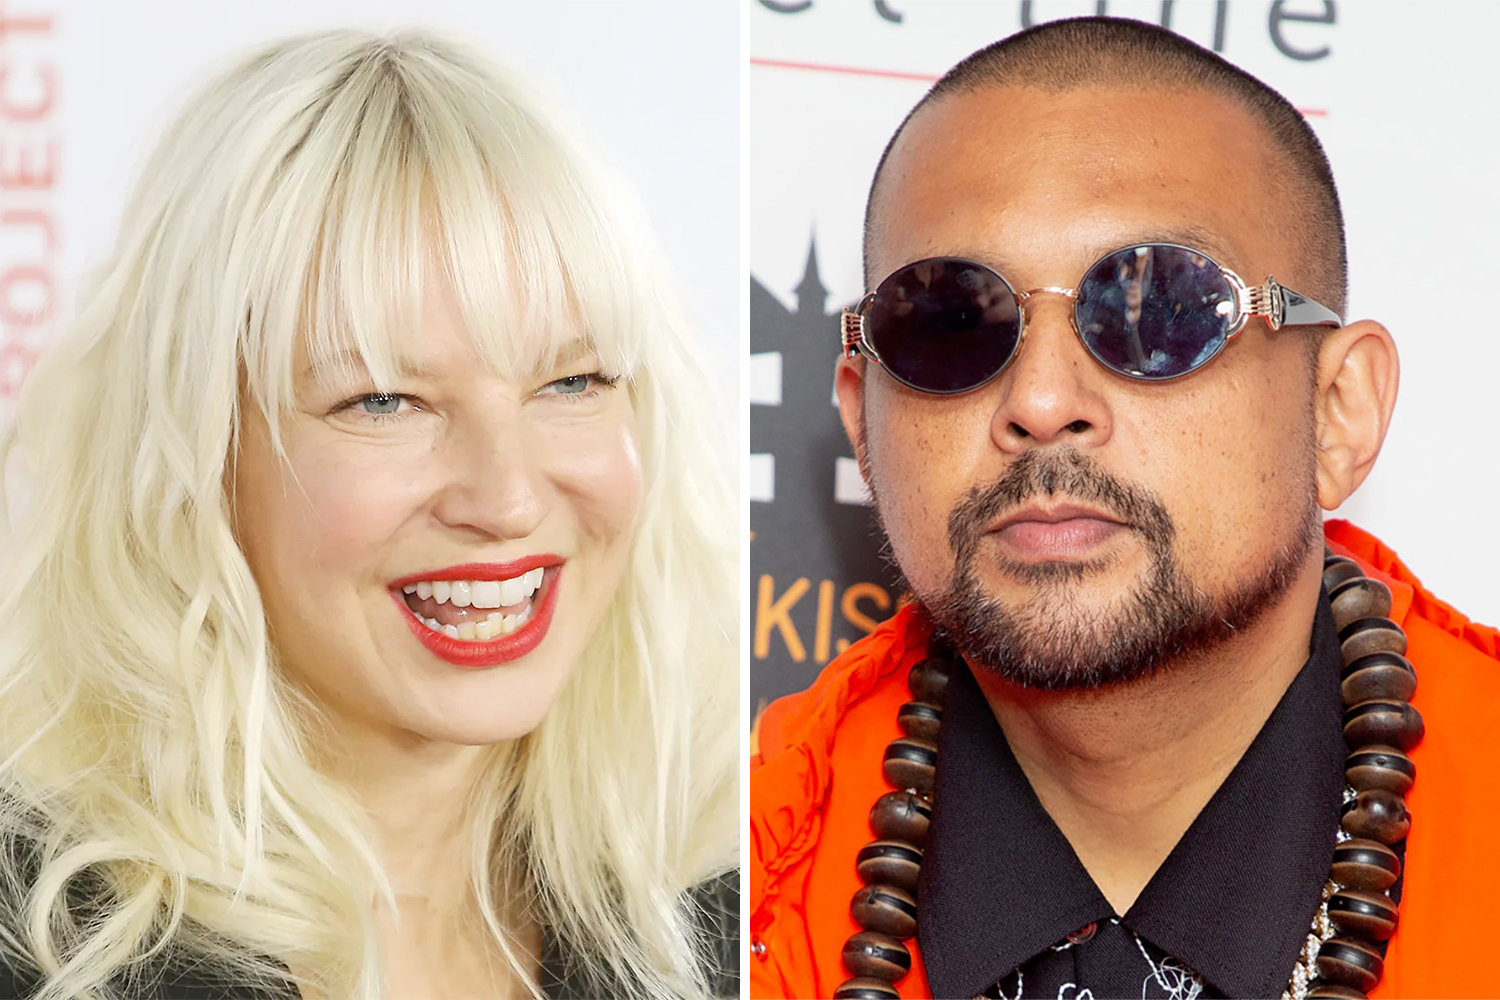 Sia’s ‘Cheap Thrills’ With Sean Paul Pops Up In Marvel’s ‘Black Widow’